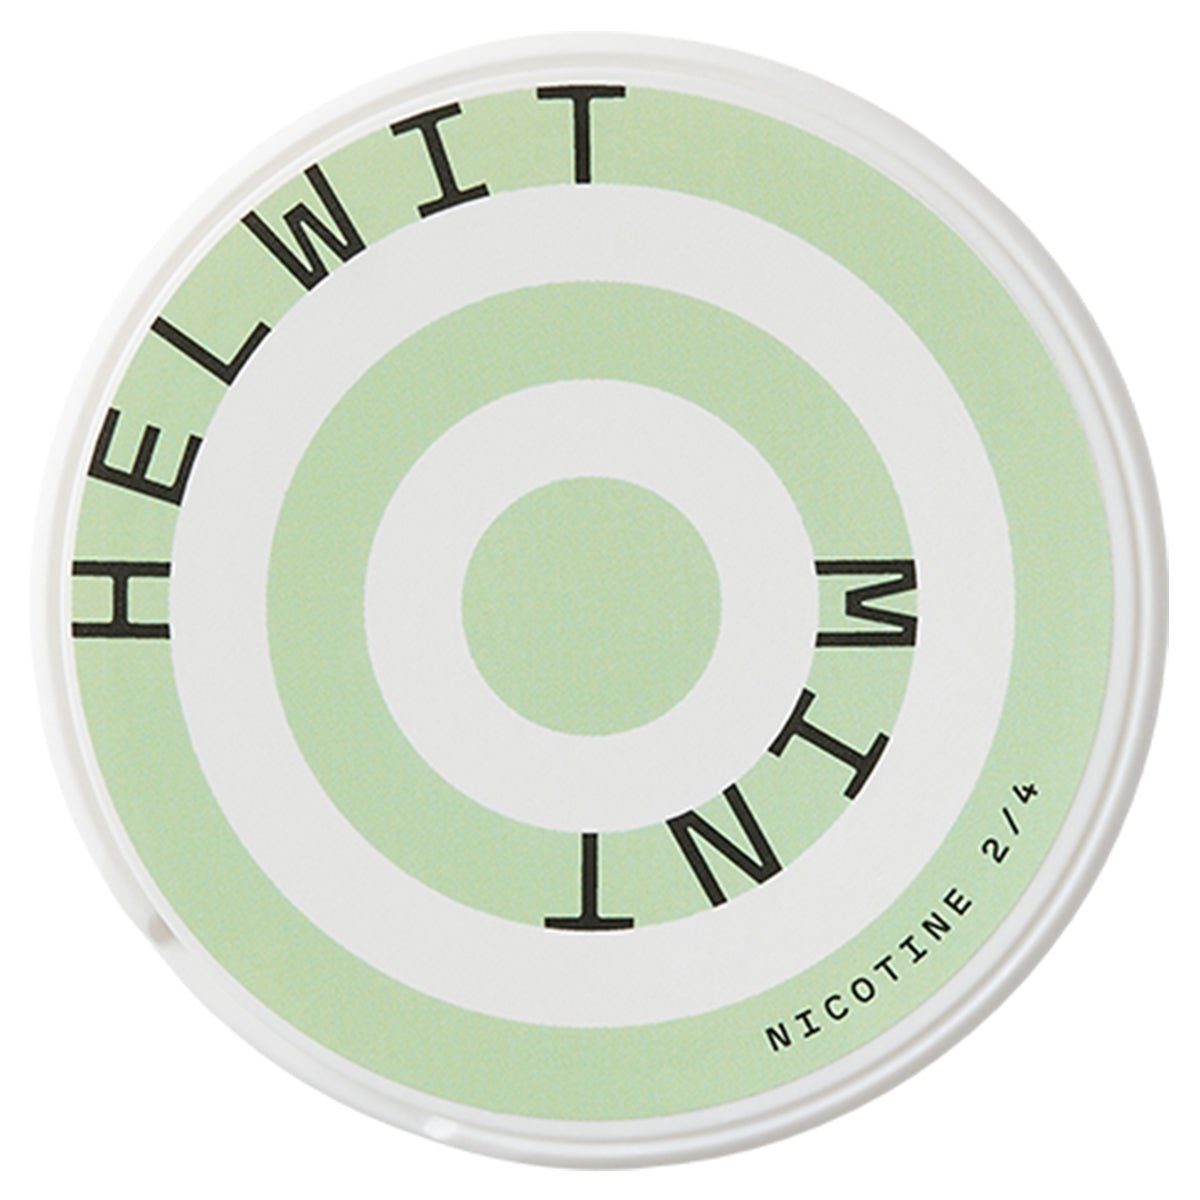 Mint Nicotine Pouches By Helwit - Prime Vapes UK